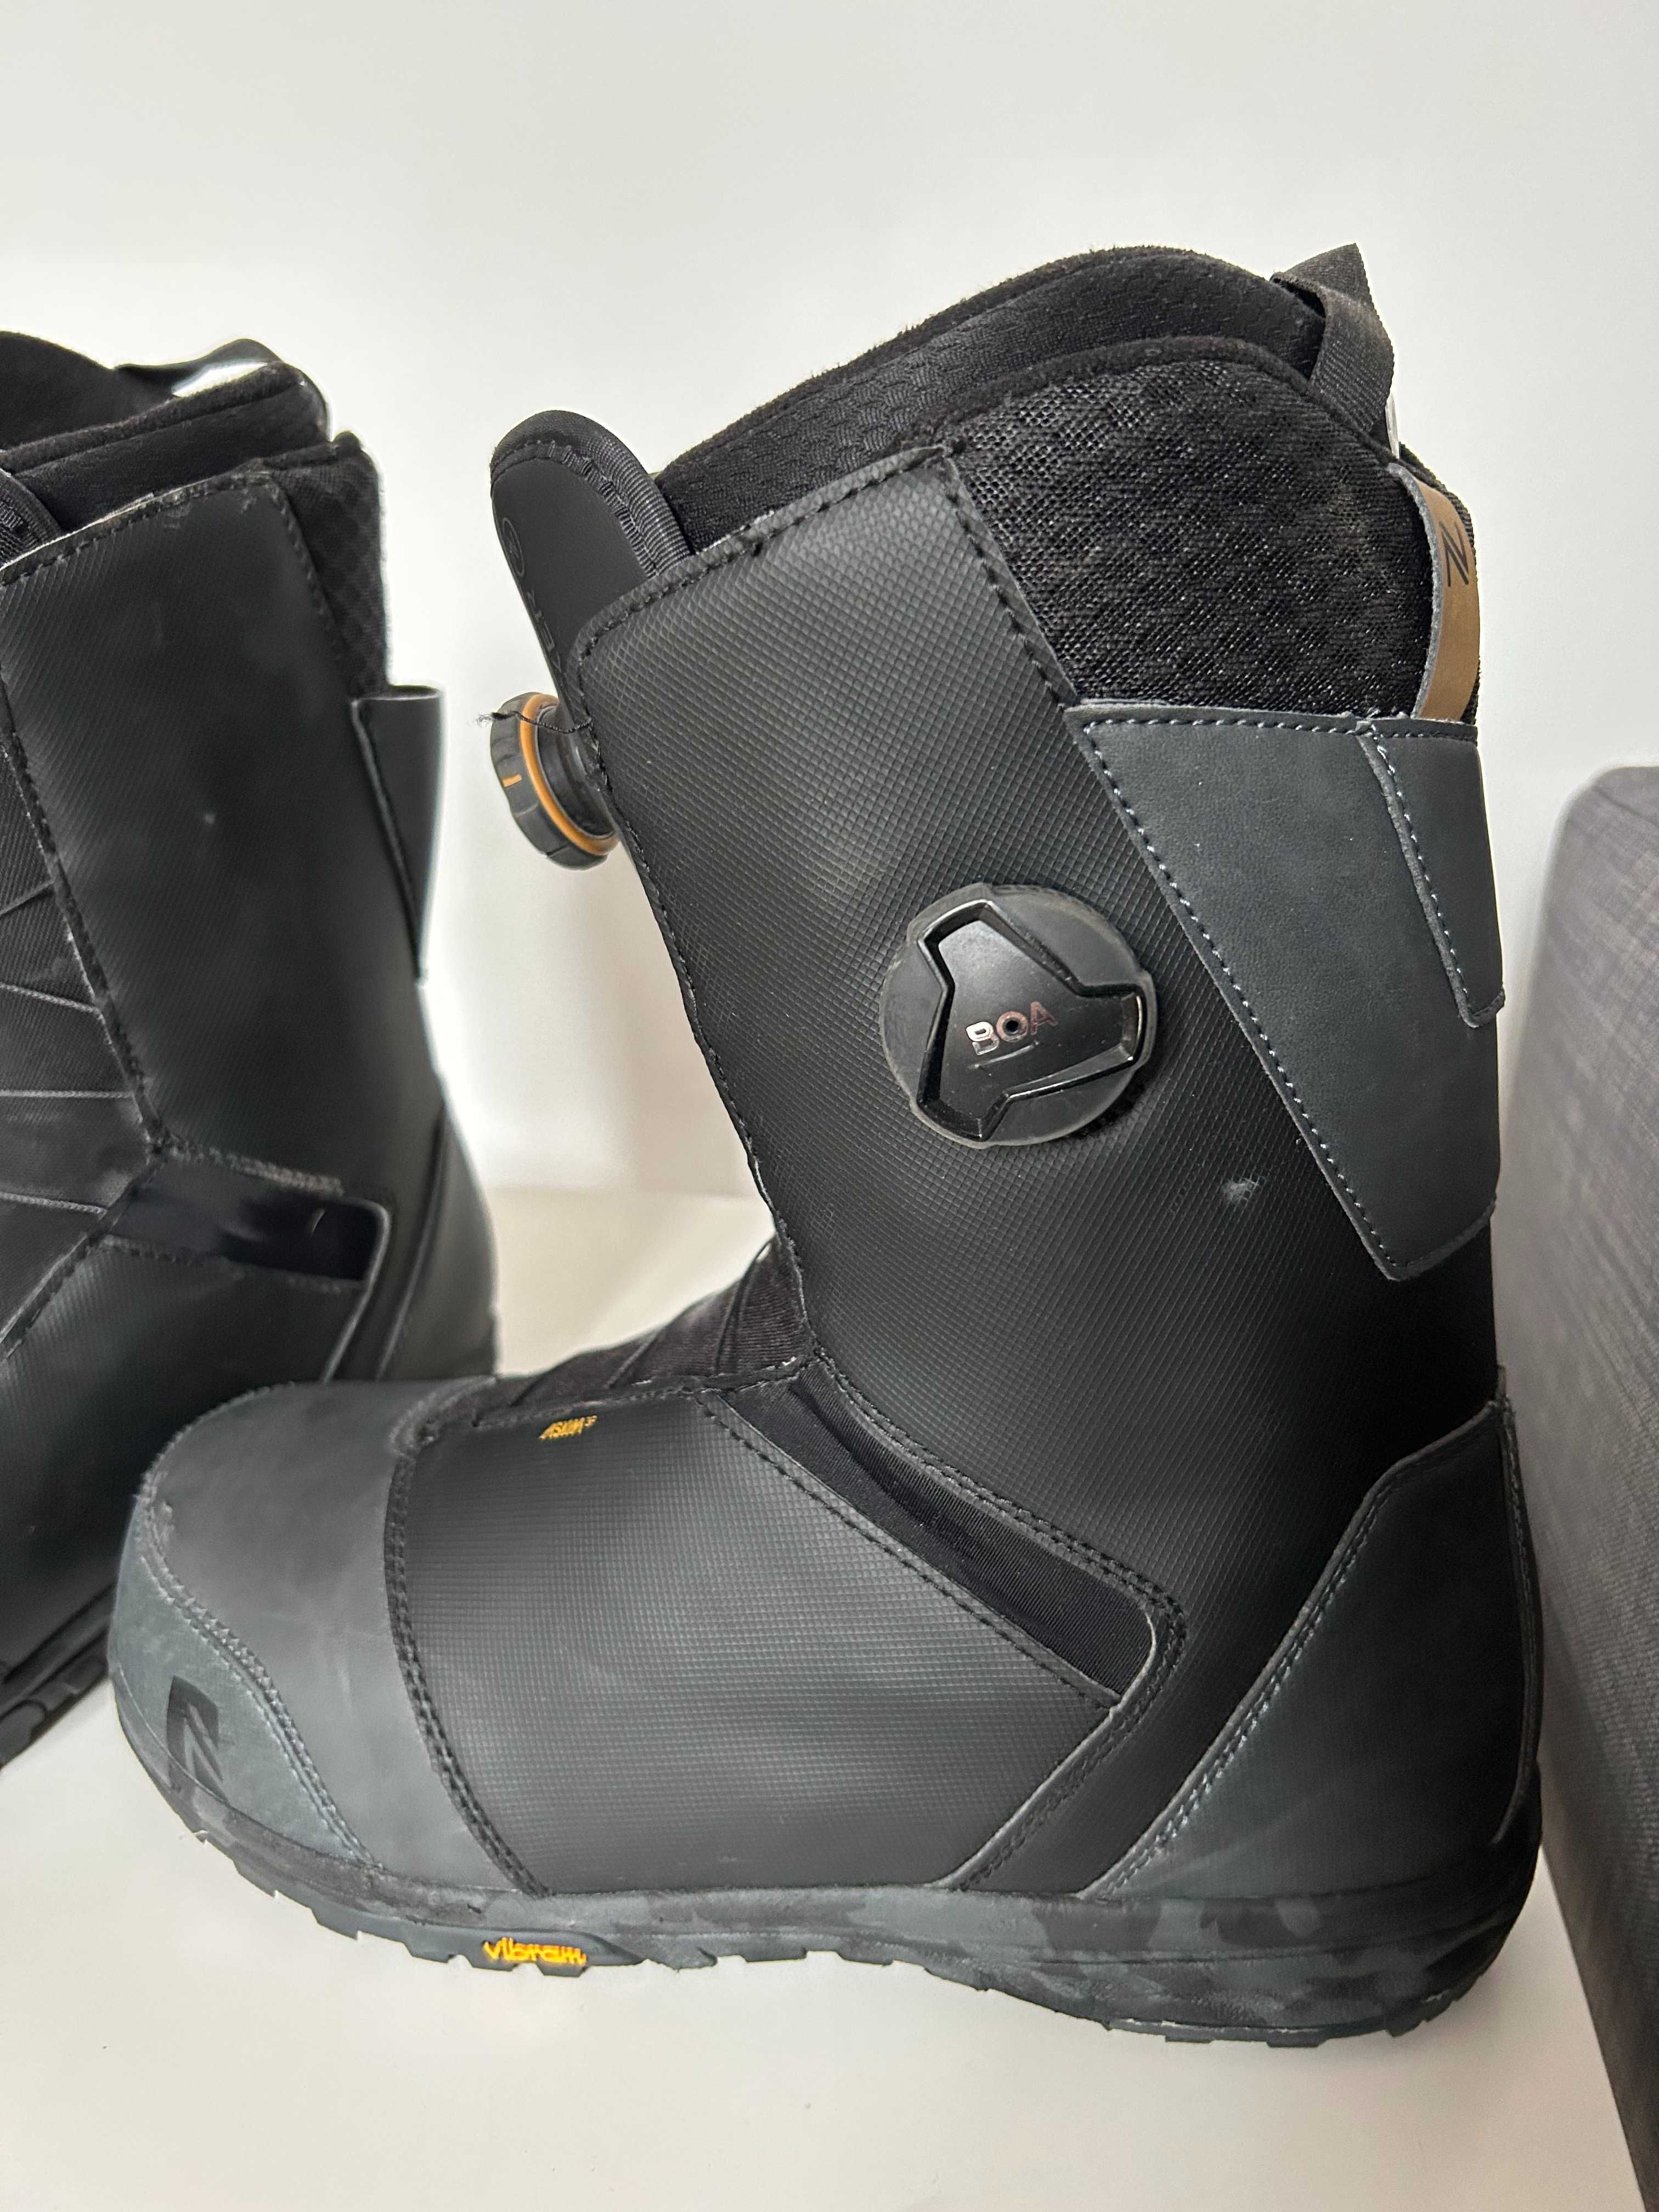 Snowboard boots 44.5